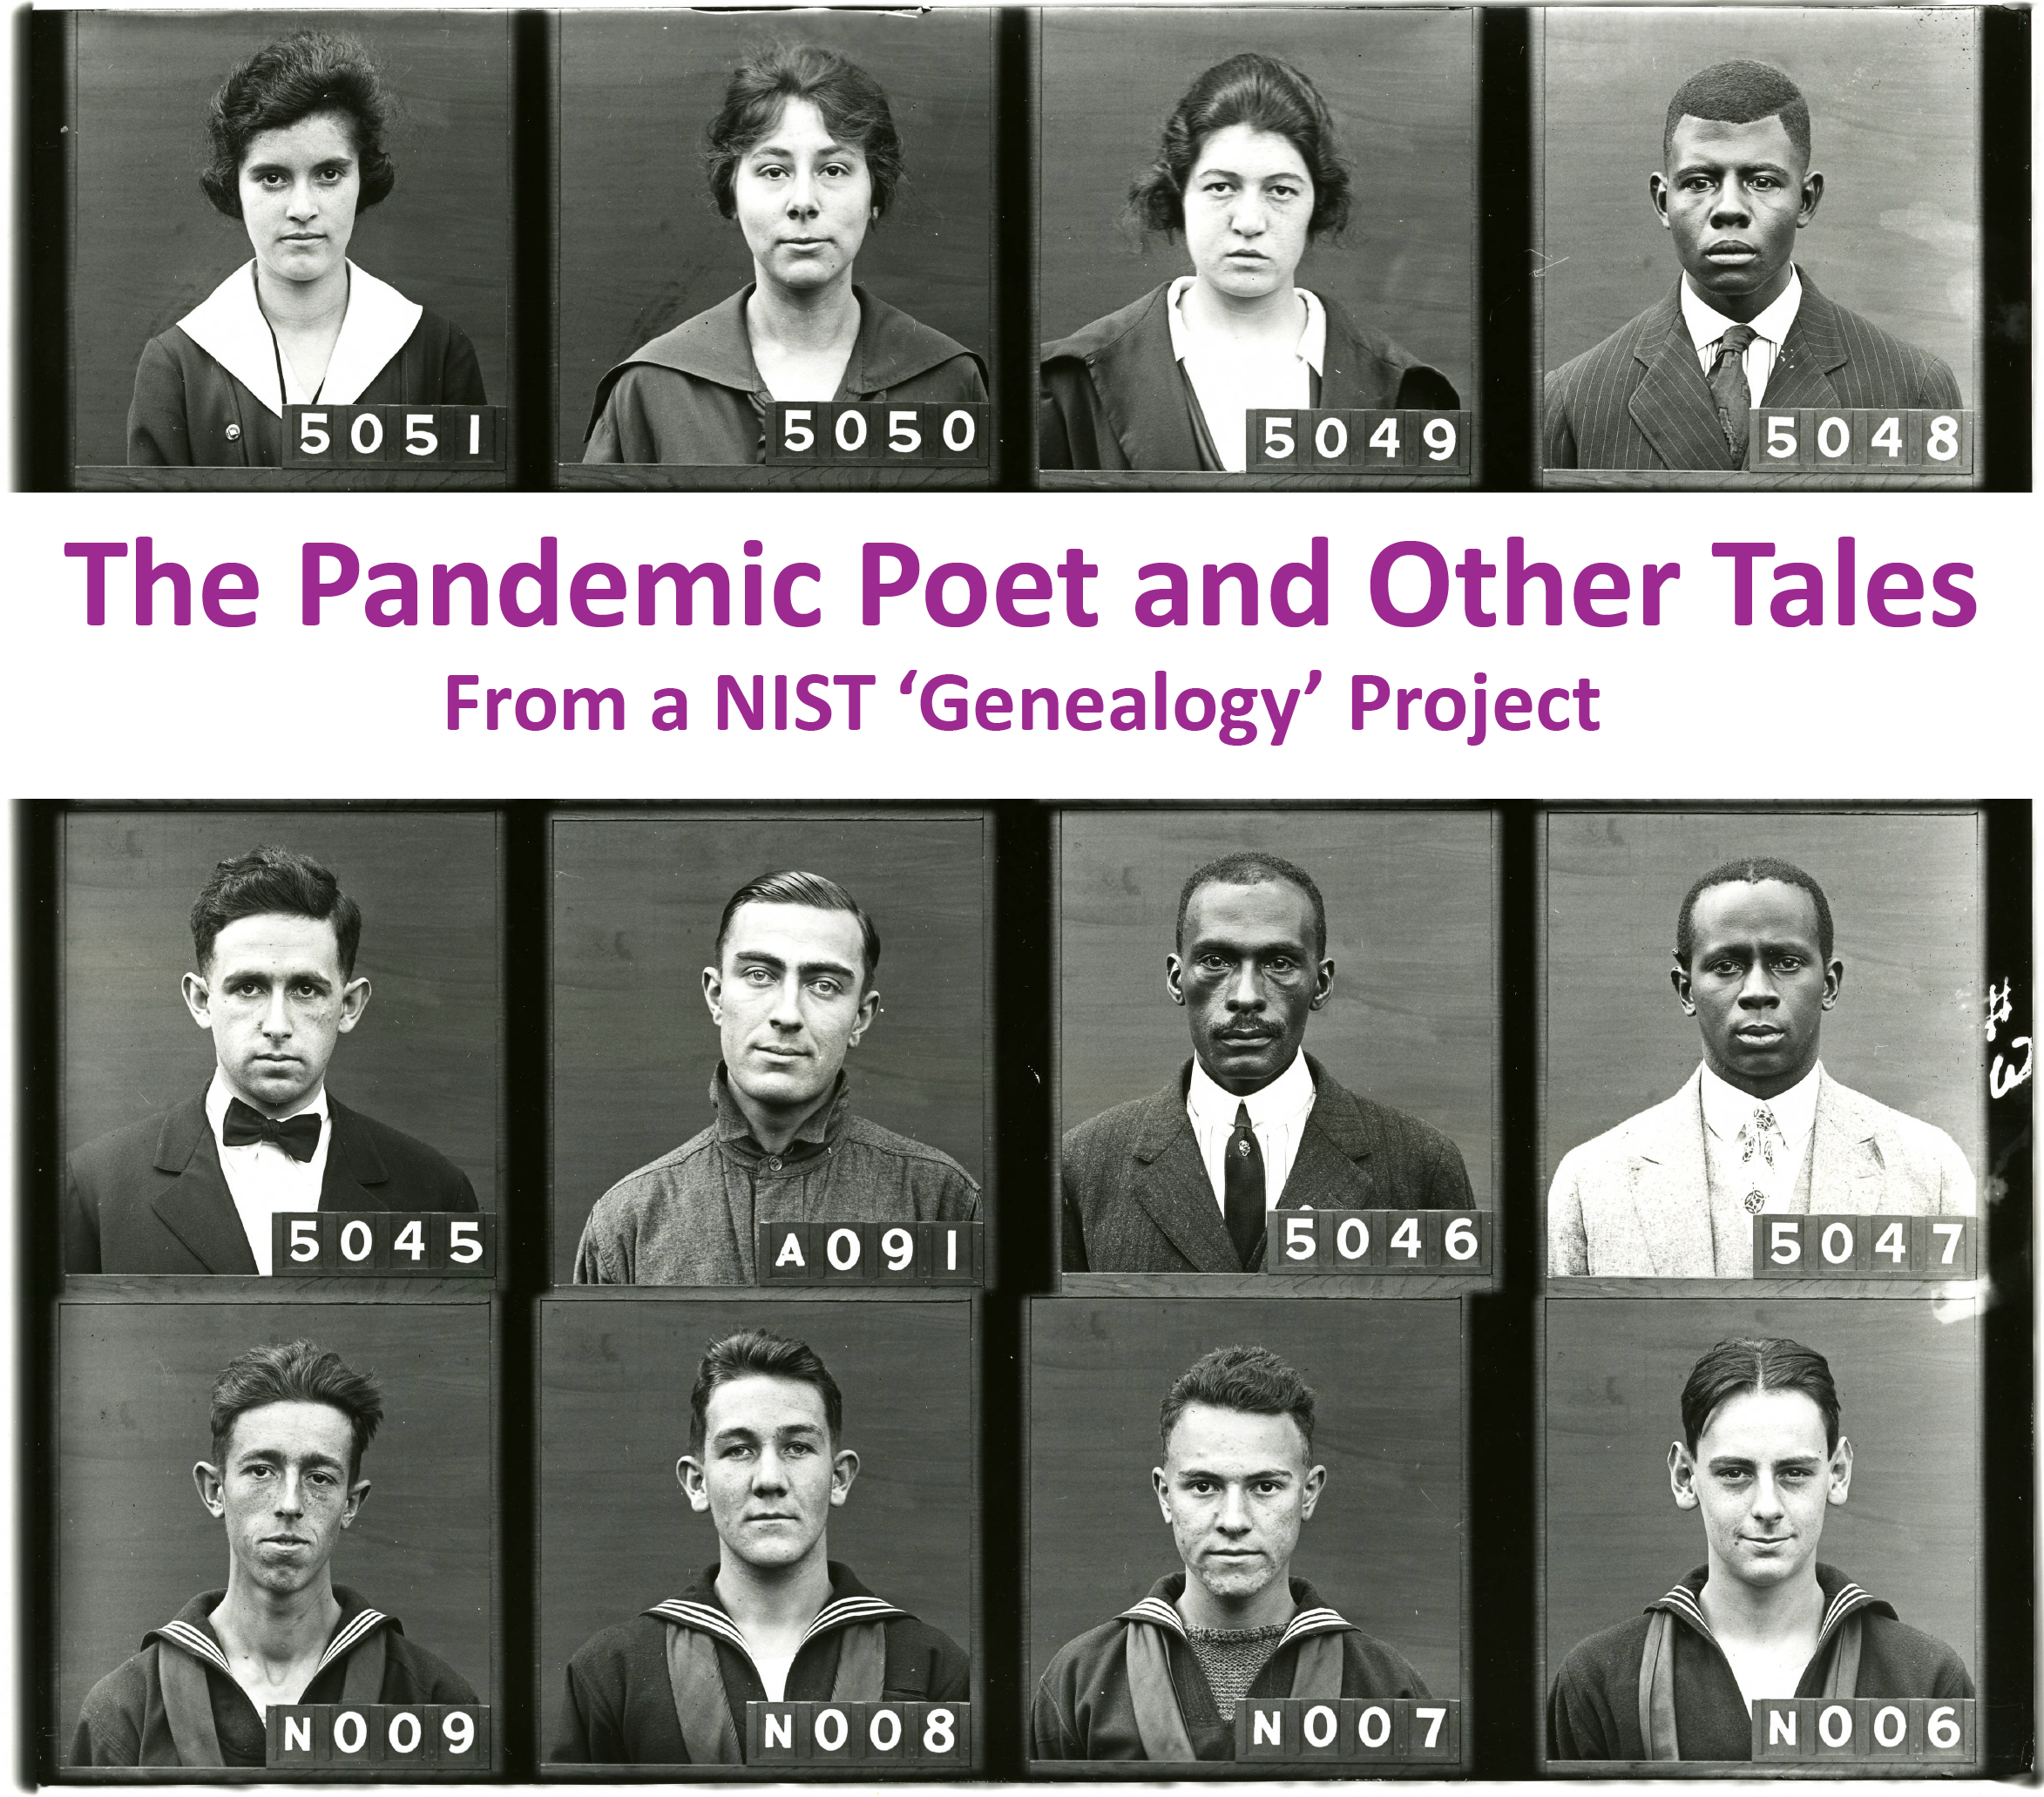 Hero Image for The Pandemic Poet and Other Tales exhibit